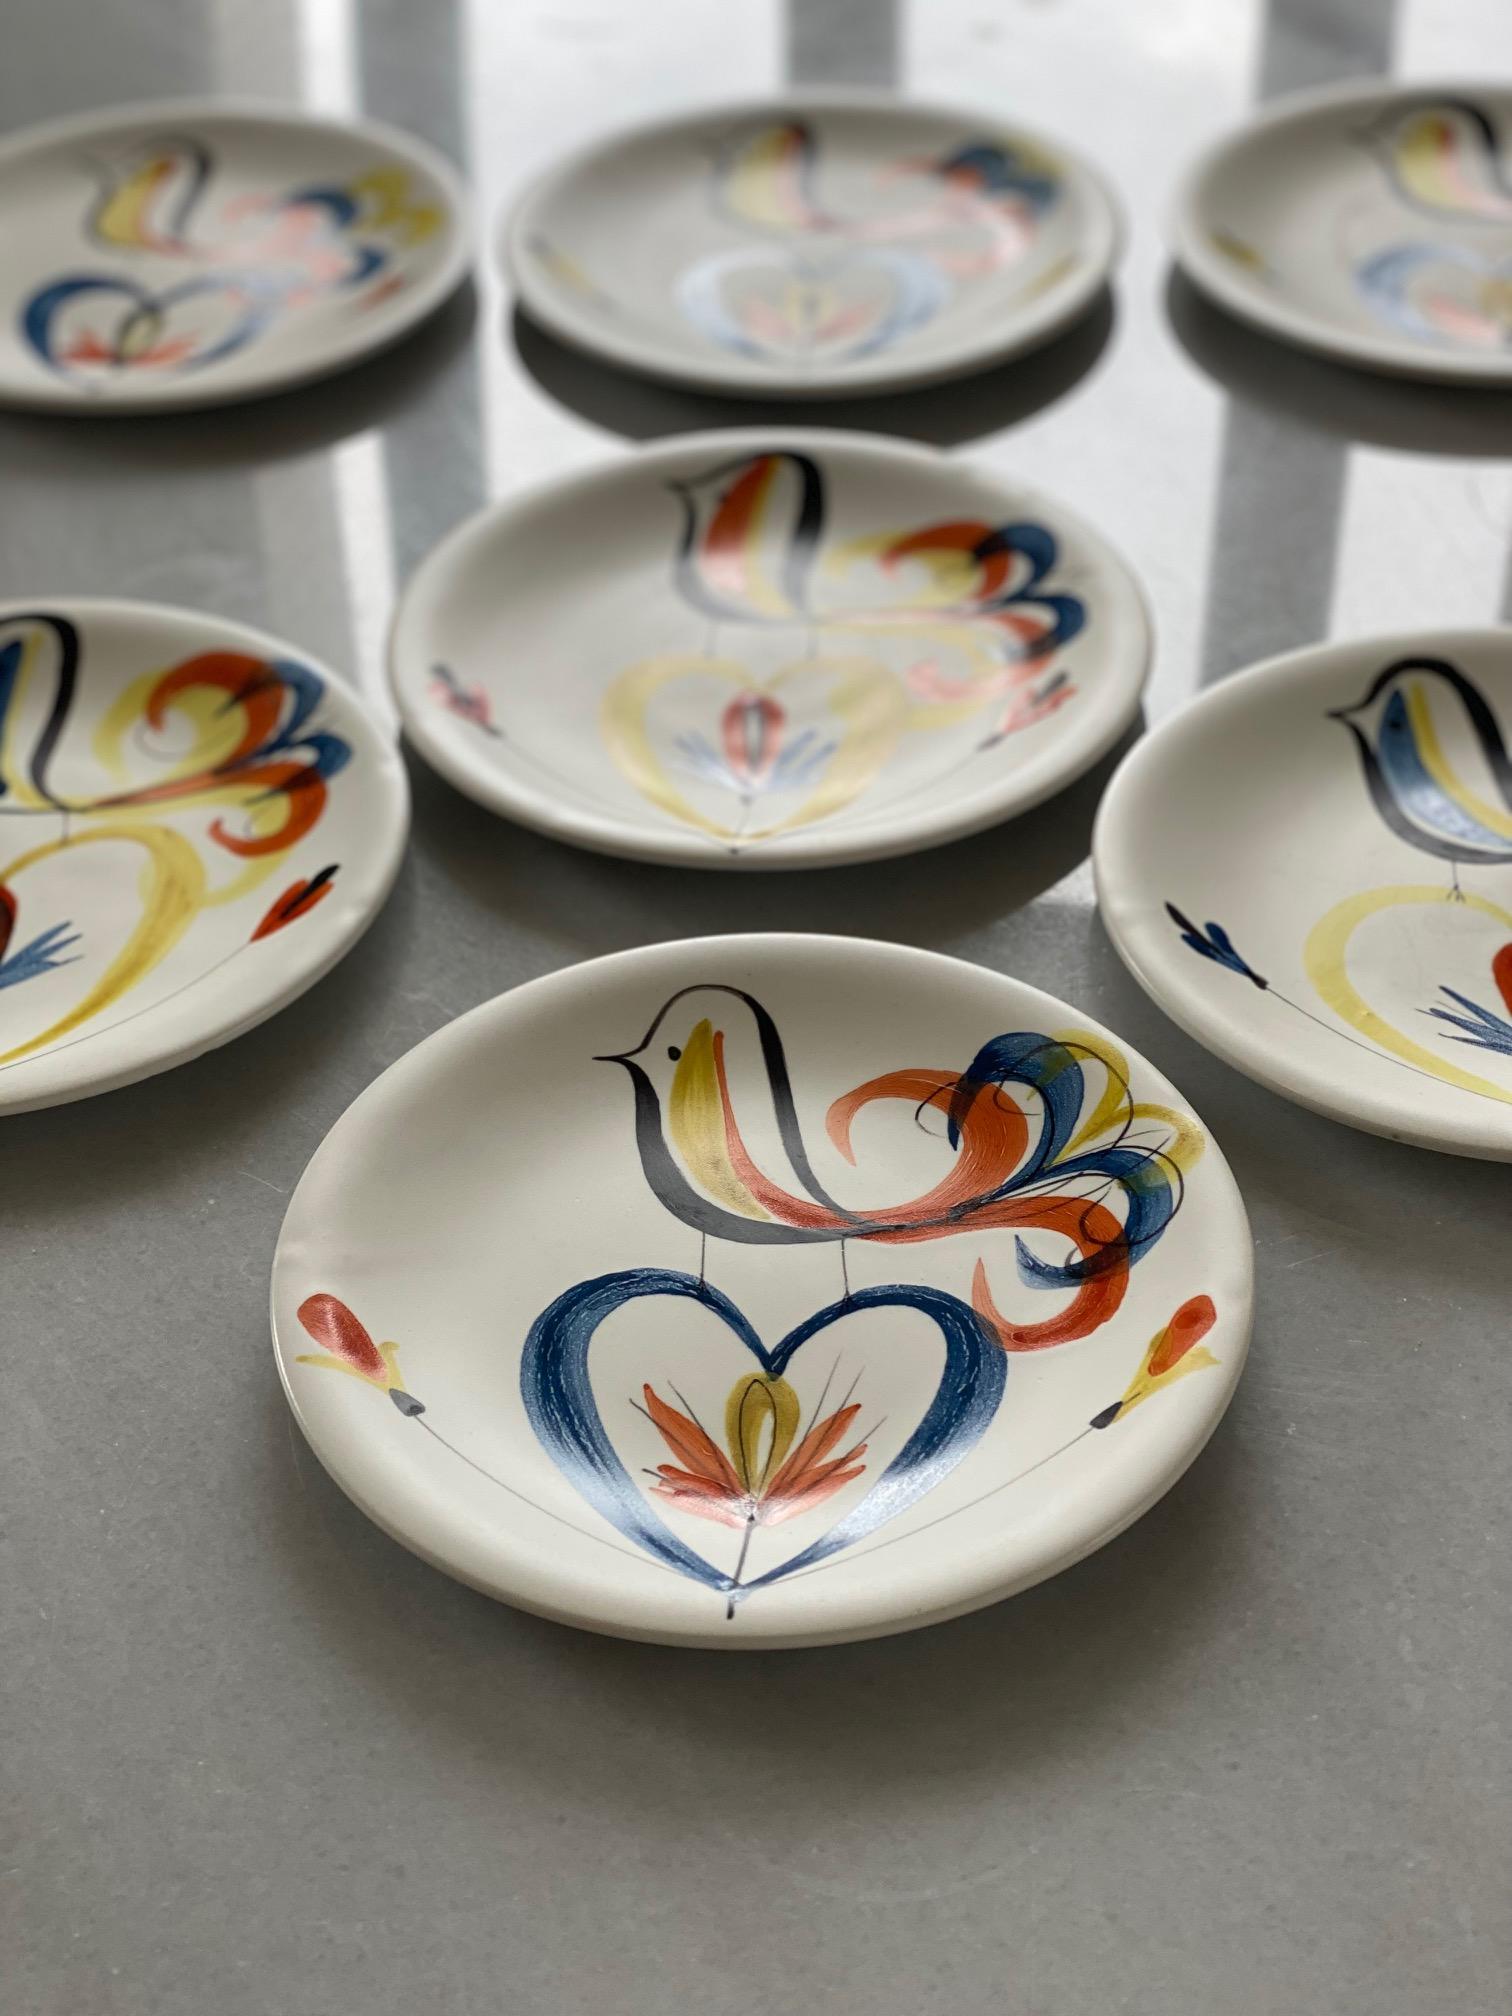 Mid-20th Century Roger Capron Set of 7 Ceramic Plates with Stylized Birds, Vallauris, 1950s For Sale